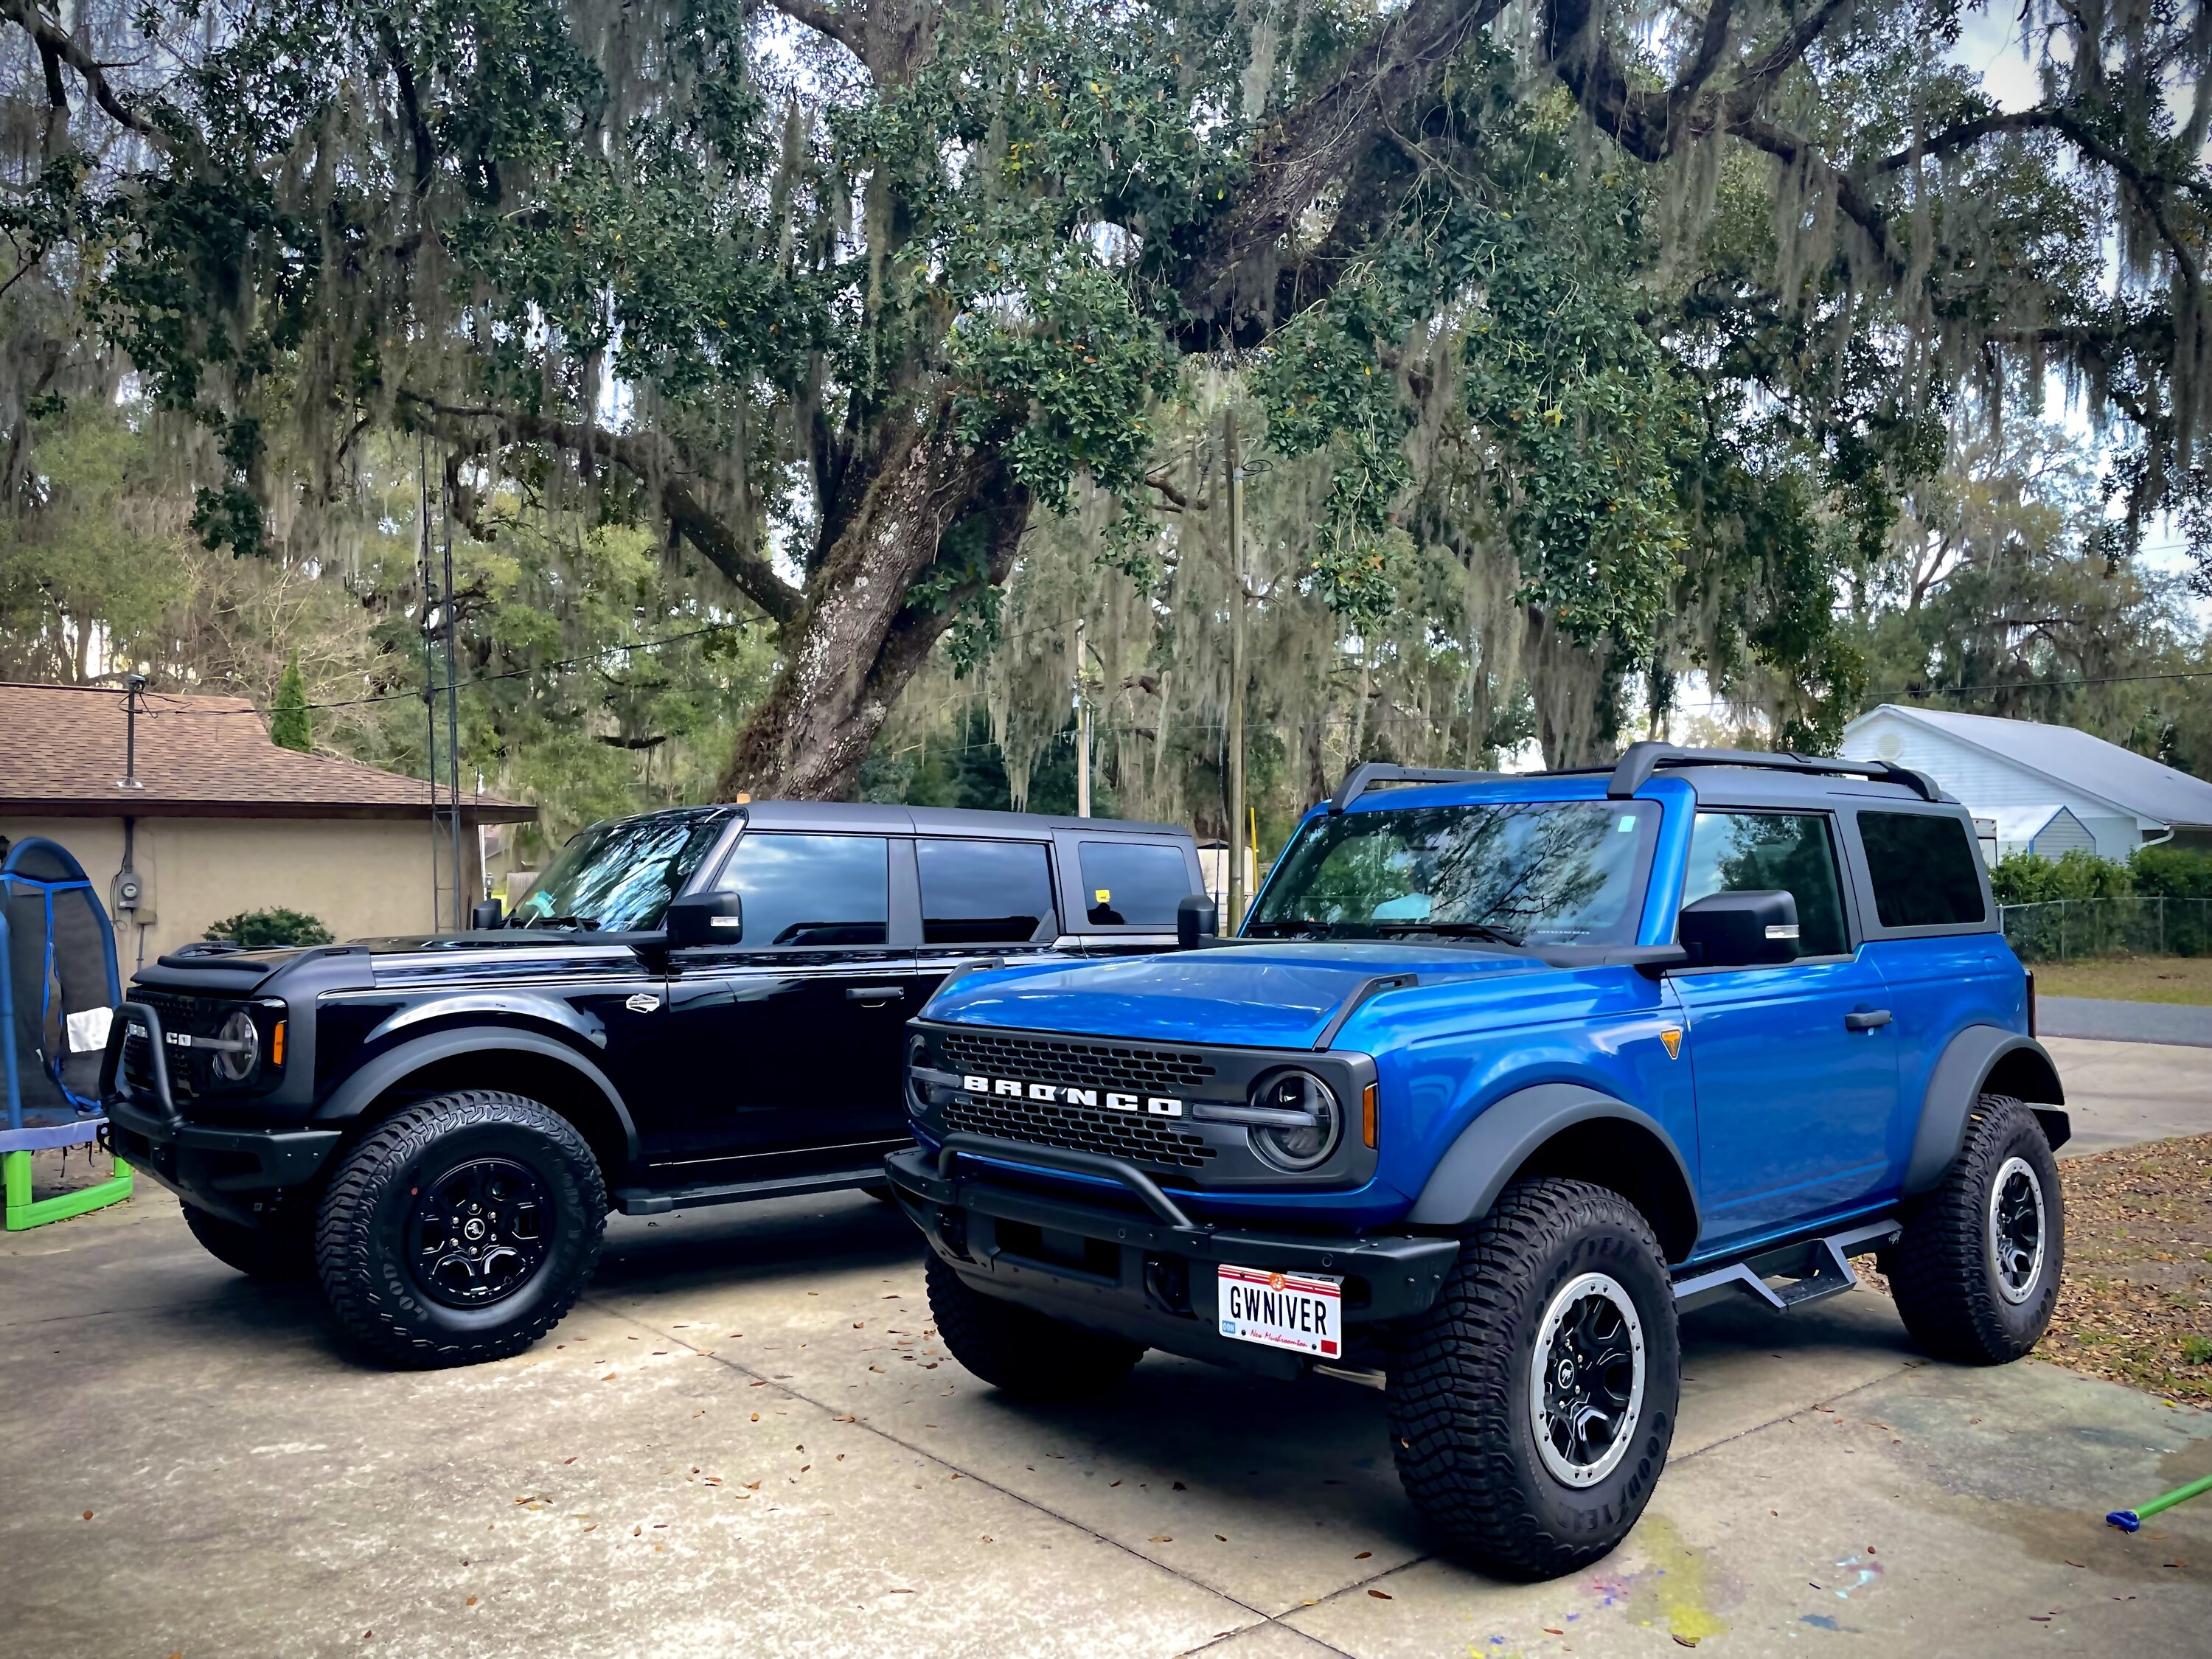 Ford Bronco Does your significant other drive your Bronco? 1678033181136